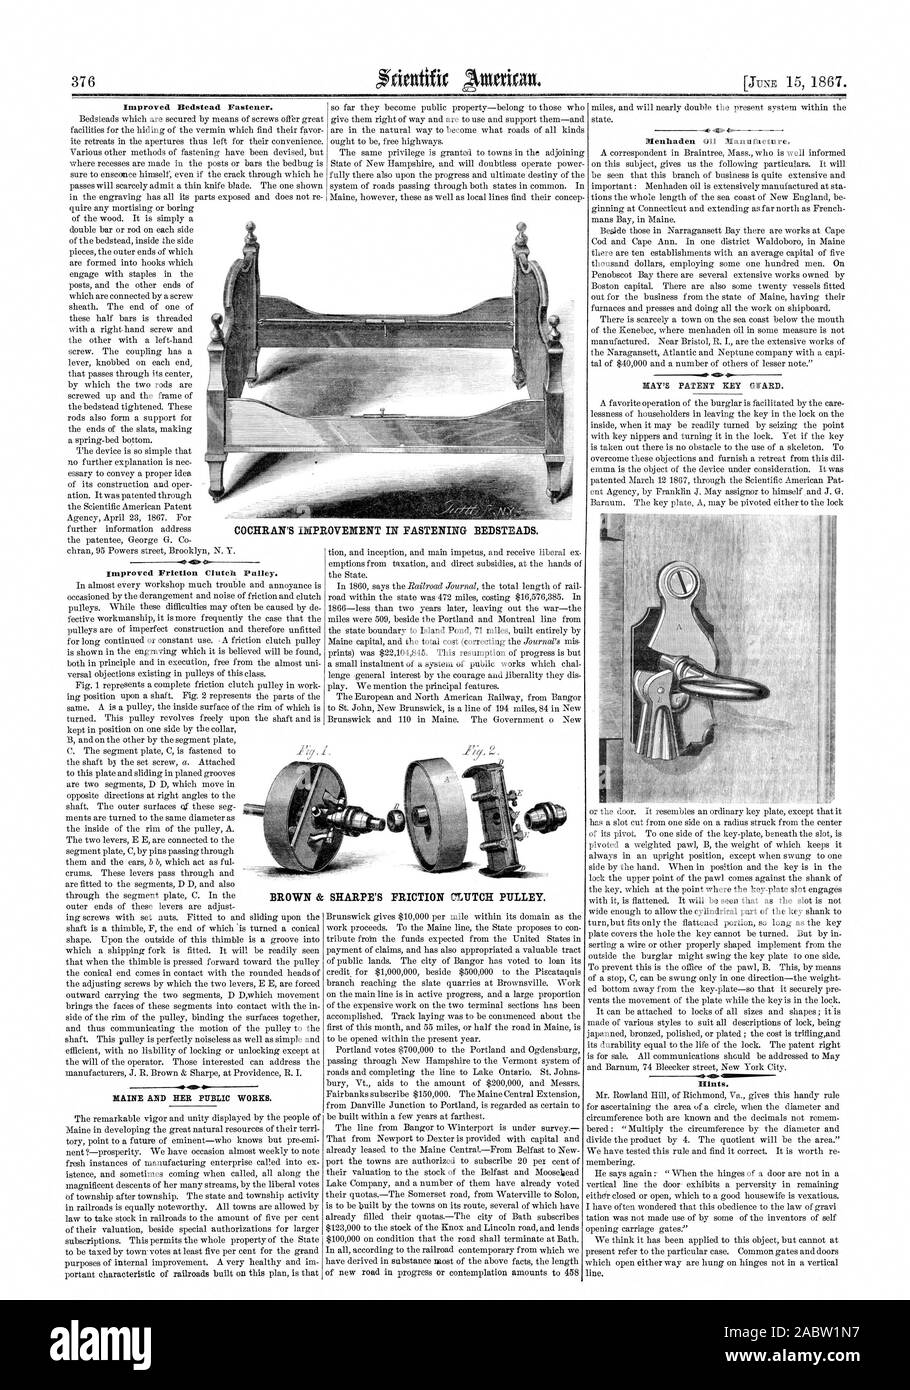 Improved Bedstead Fastener. Improved Friction Clutch Pulley. Menhaden 0 Manufacture. -1.41 flints. COCHRAN'S IMPROVEMENT IN FASTENING BEDSTEADS. BROWN & SHARPE'S FRICTION CLUTCH PULLEY., scientific american, 1867-06-15 Stock Photo